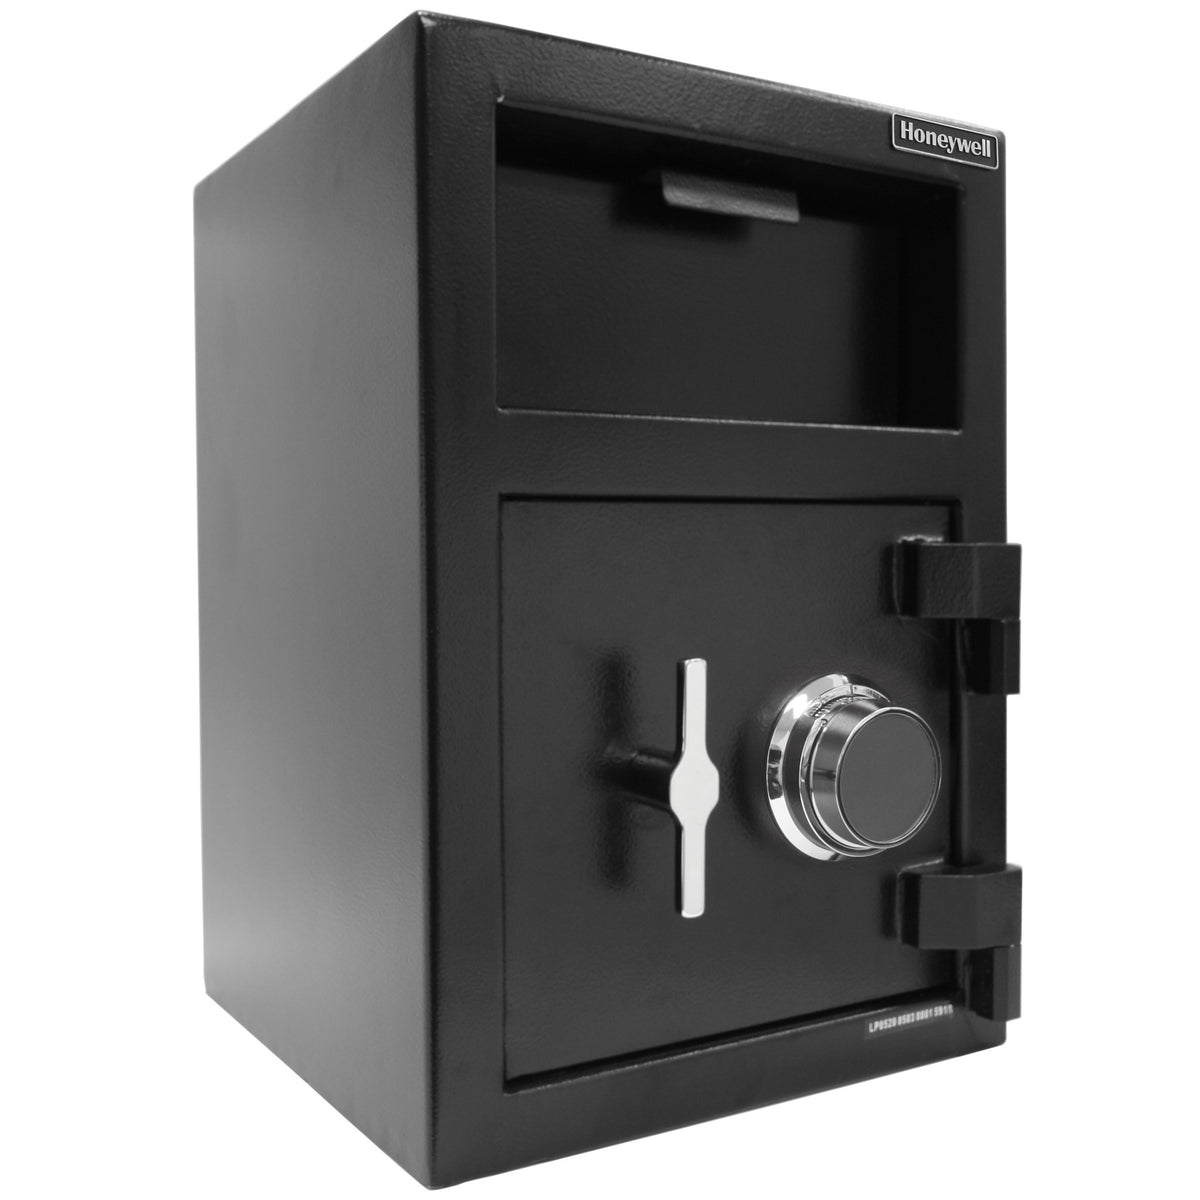 Honeywell 5911 Front Loading Depository Safe with Combination Lock